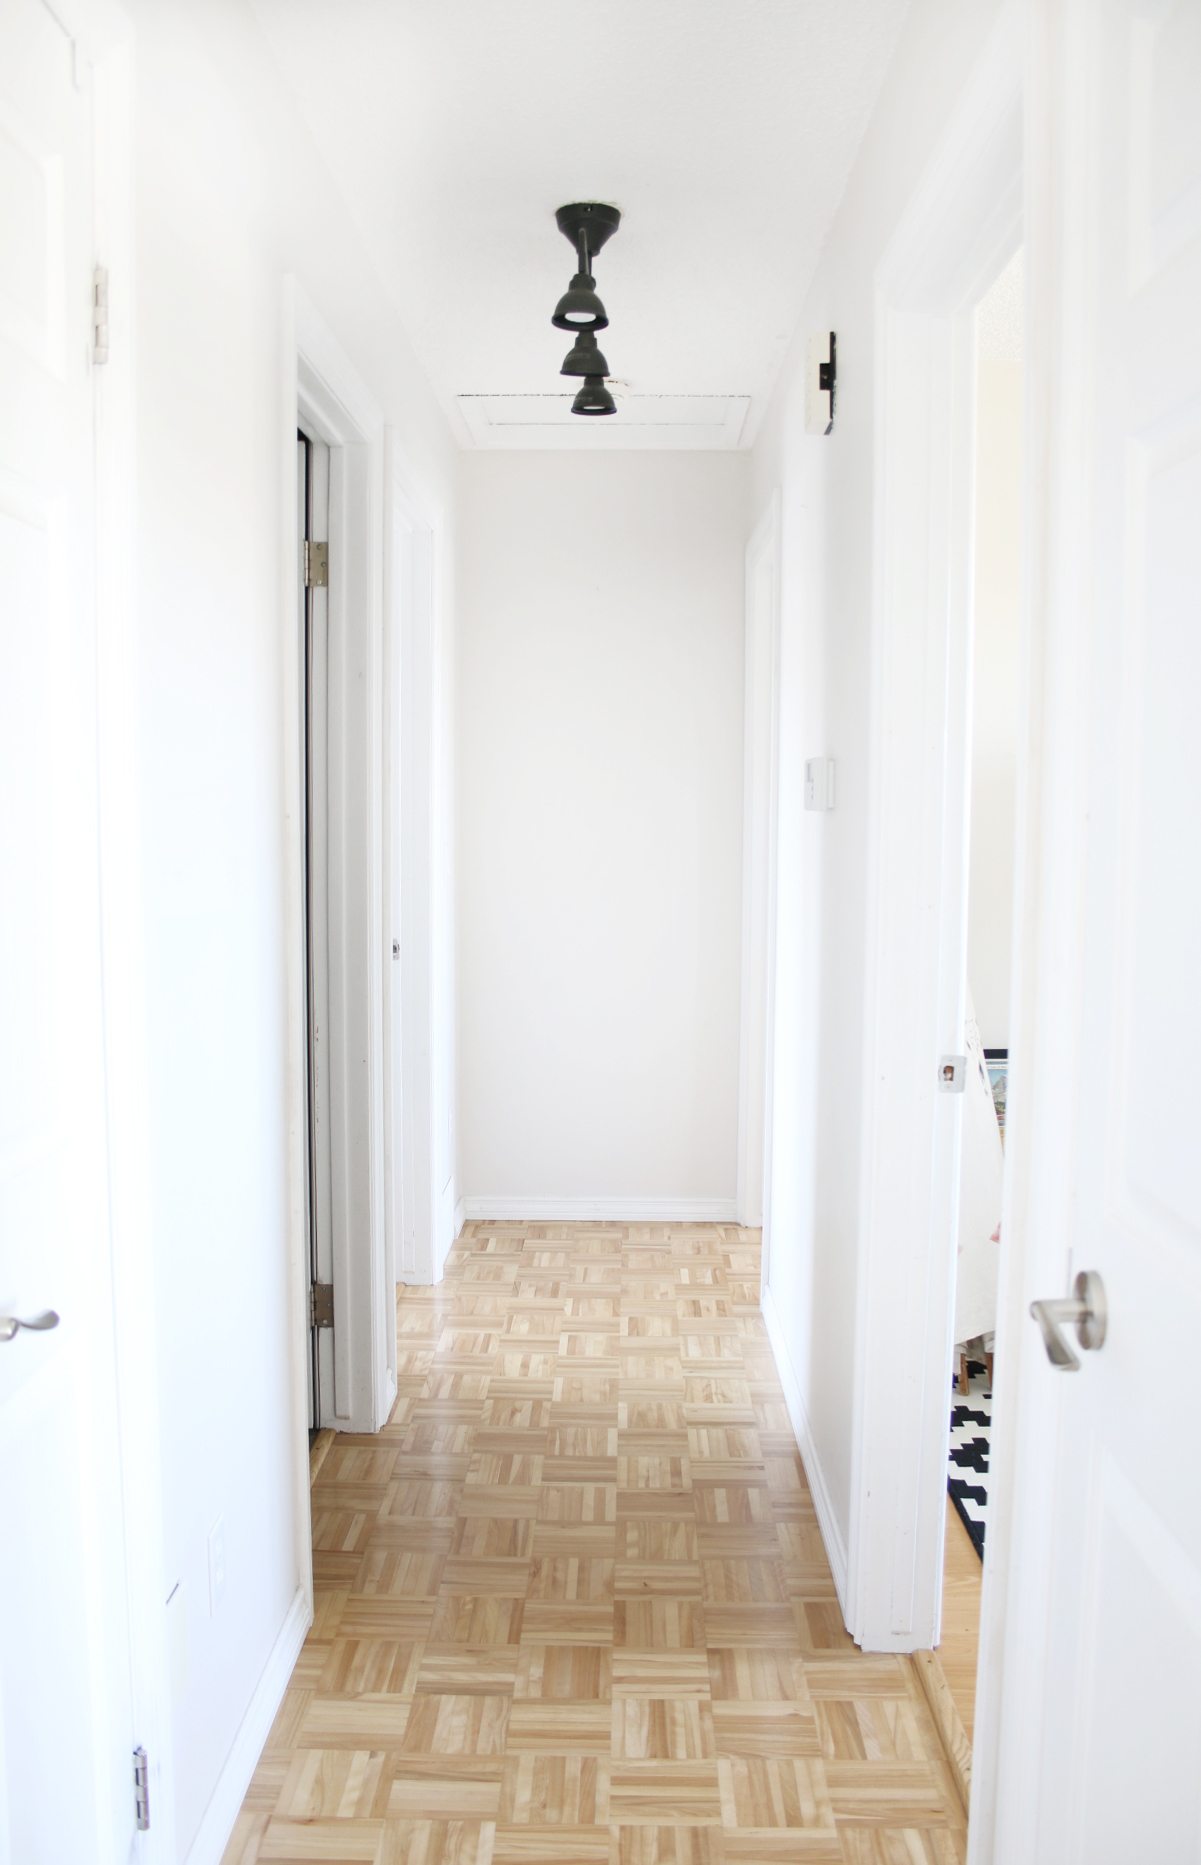 Interior hallway with brown tile floor and white walls.